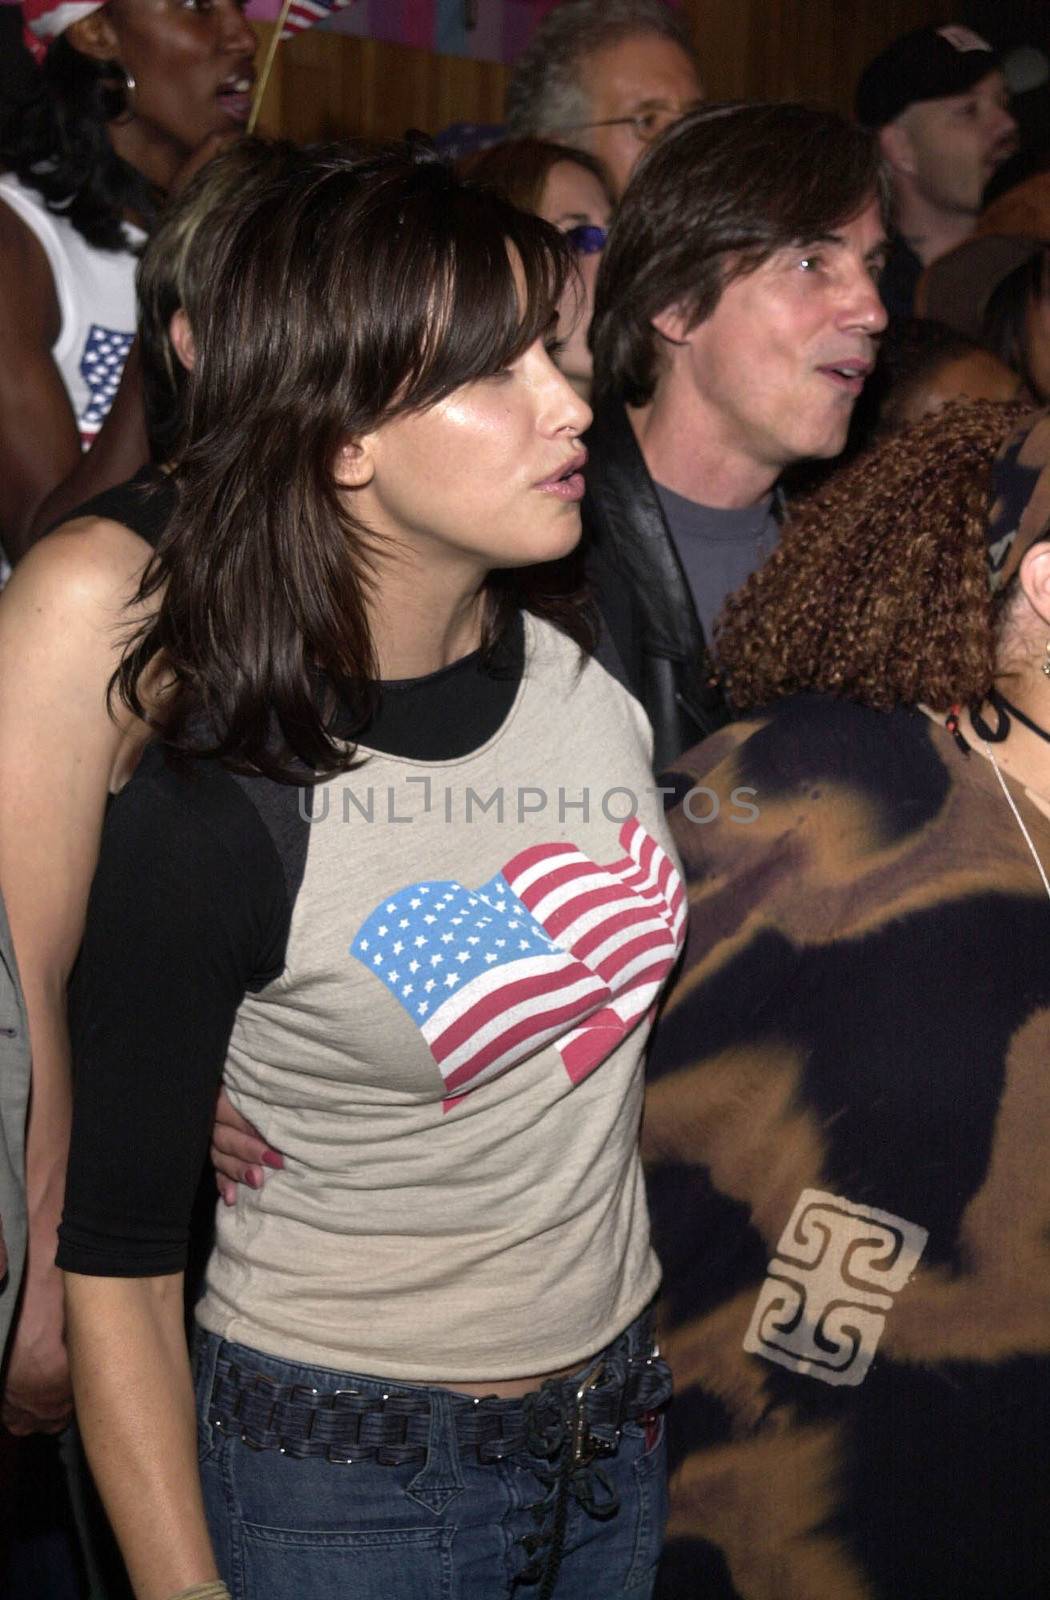 GINA GERSHON and JACKSON BROWN at the celebrity recording of "We Are Family" to benefit the victims of New York's 9-11 tragedy, 09-23-01